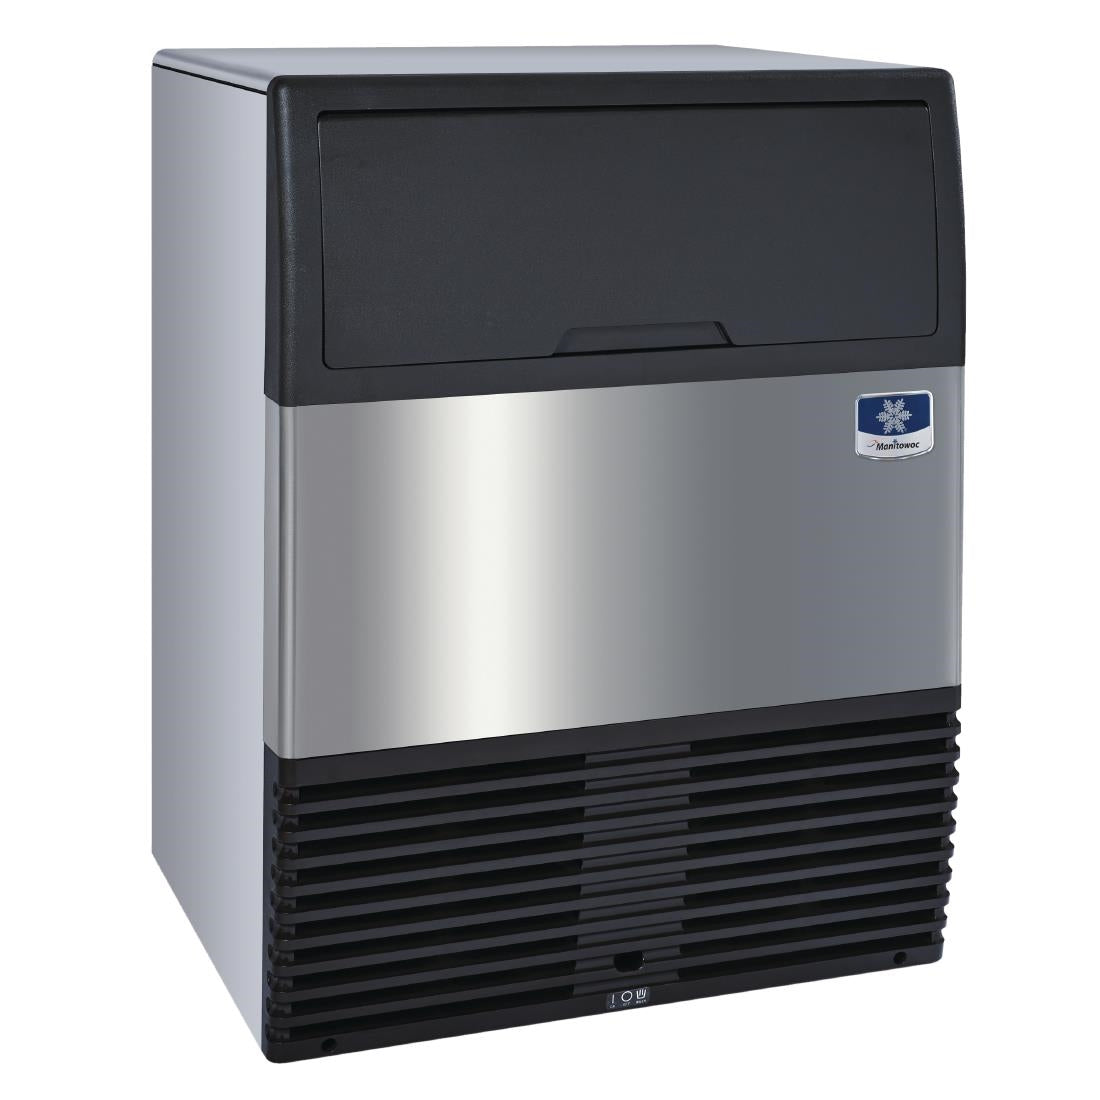 DW662 Manitowoc Sotto Integral Undercounter Air-cooled Ice Maker 76kg/24hr UGP080A JD Catering Equipment Solutions Ltd